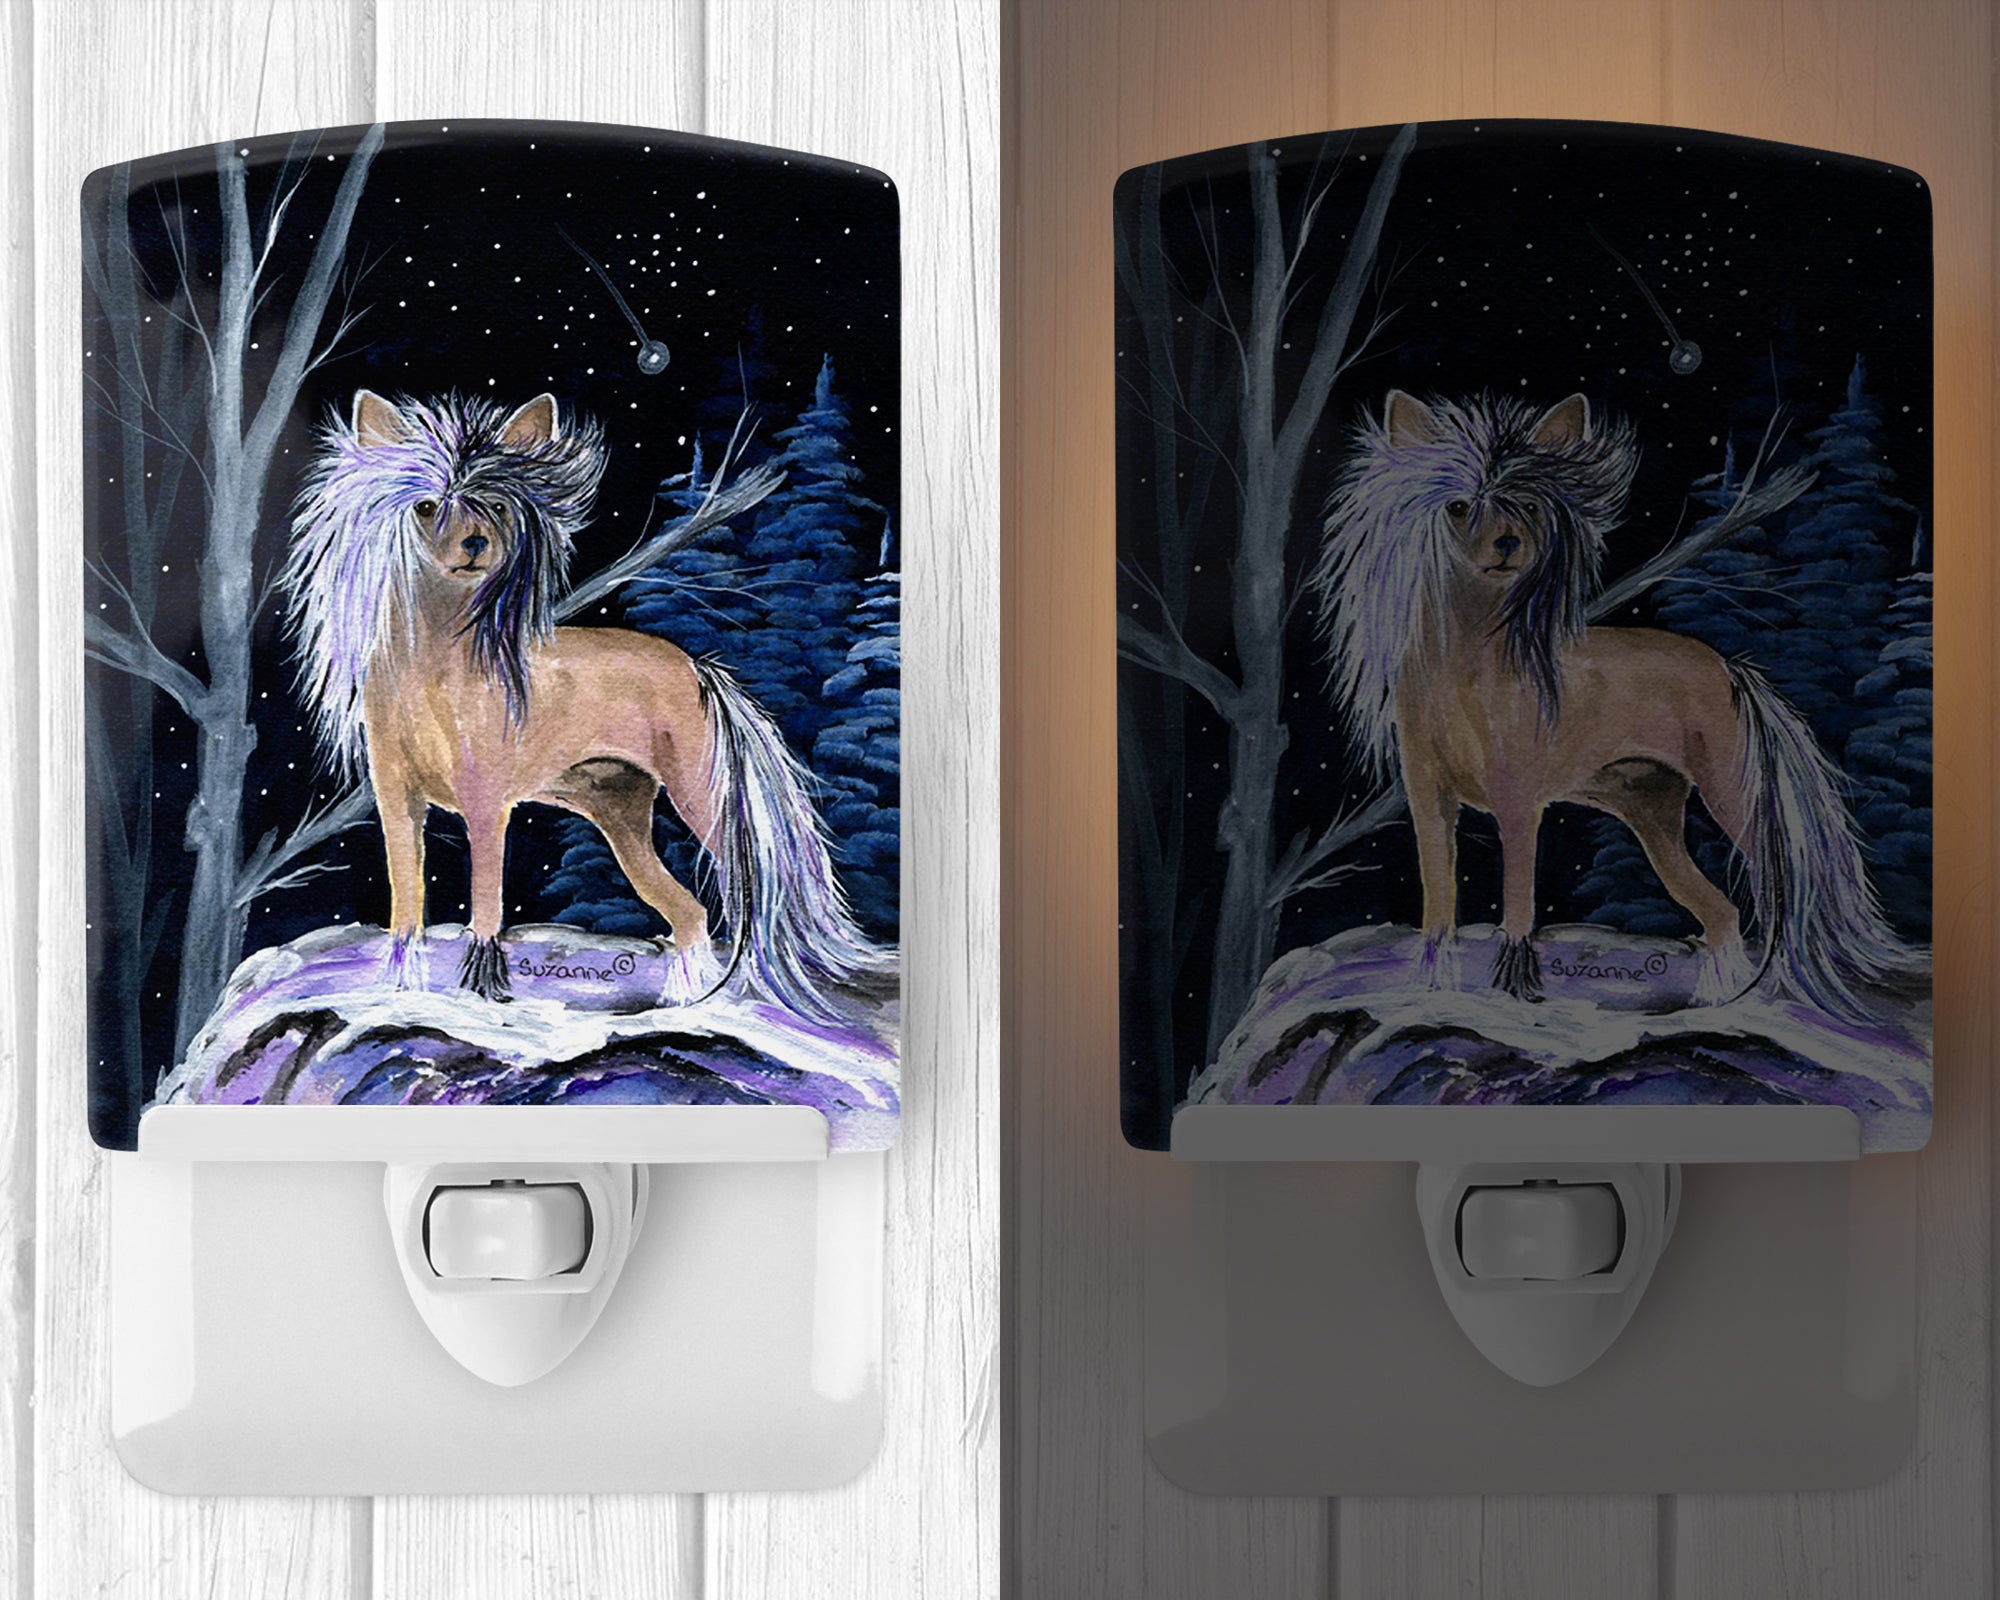 Starry Night Chinese Crested Ceramic Night Light SS8390CNL - the-store.com